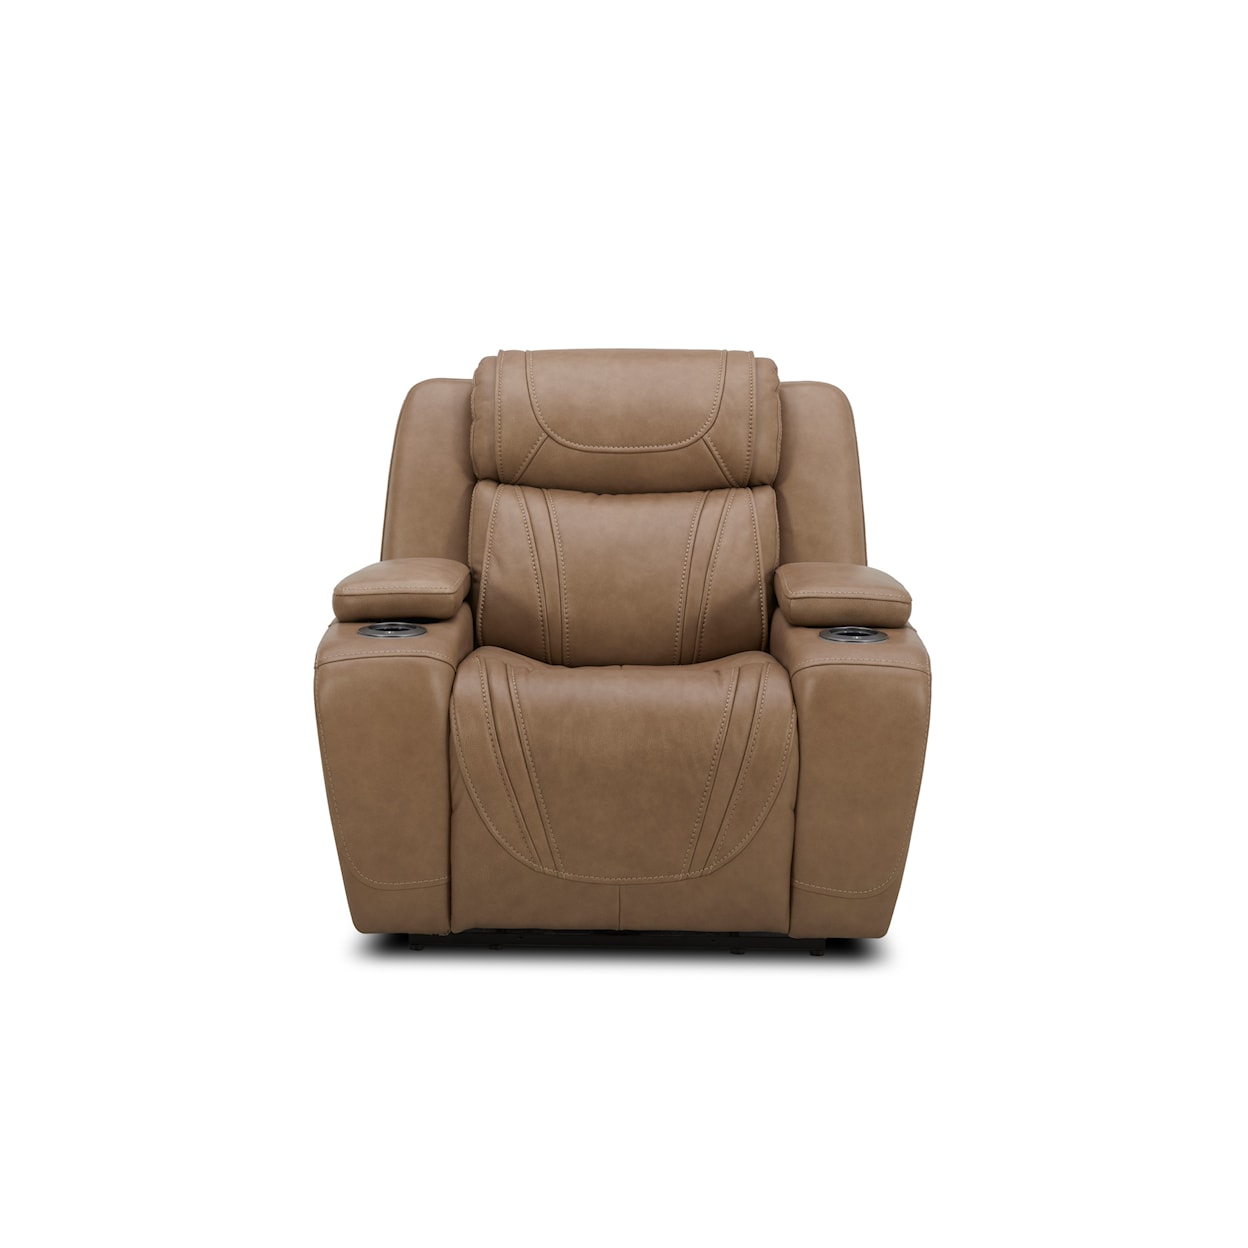 Kuka Home 615 Transformer Leather Collection 6155 Sand Leather Dual Power Recliner